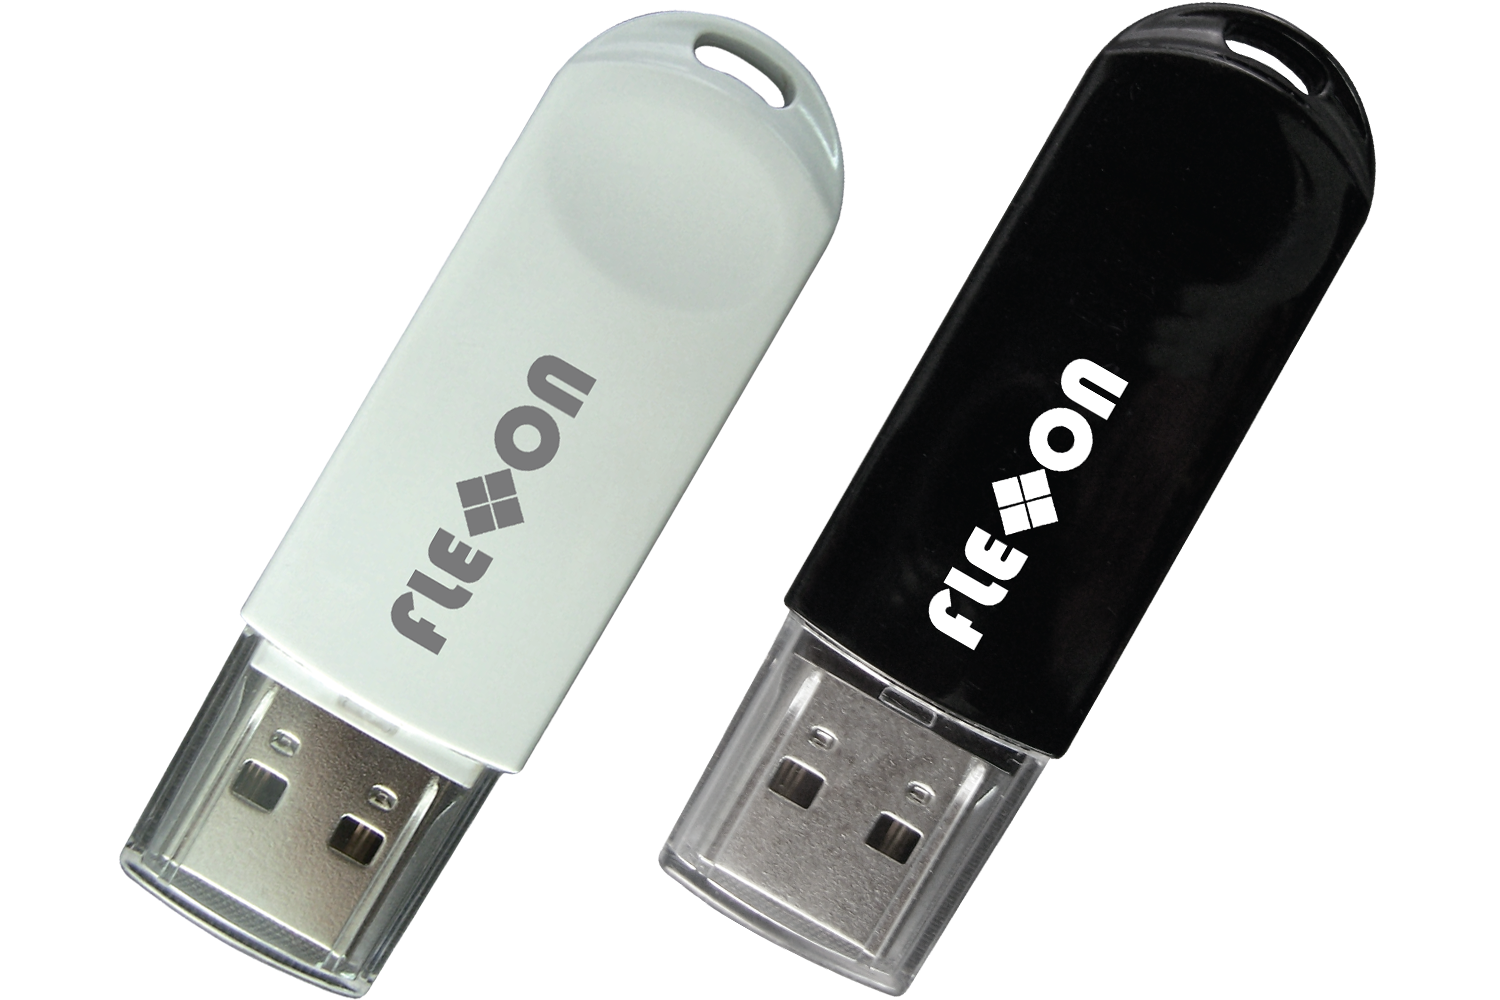 Pen Drive PNG Image with Transparent Background